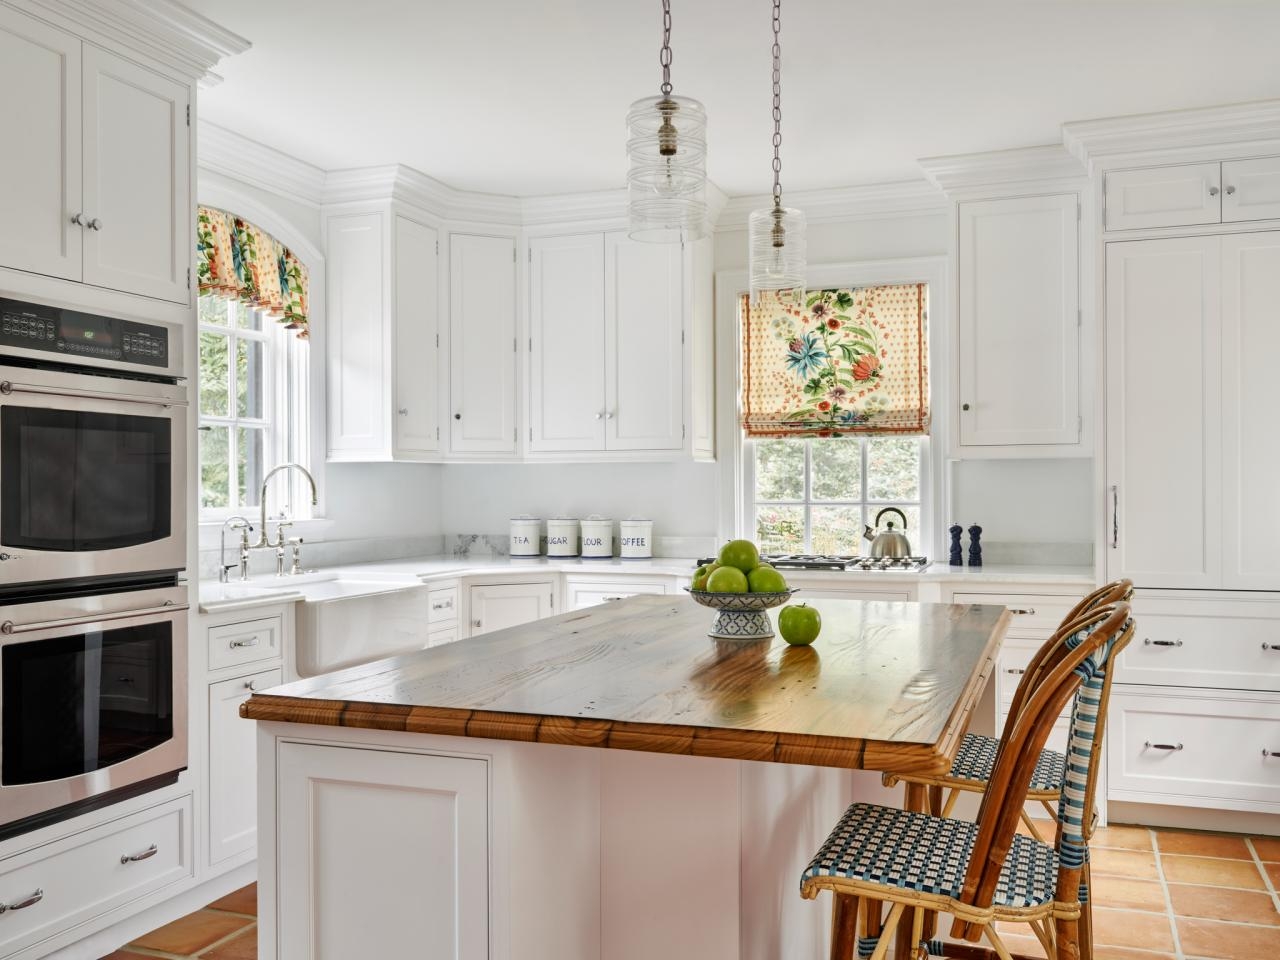 Choosing The Right Kitchen Window Treatments Interior Design Explained